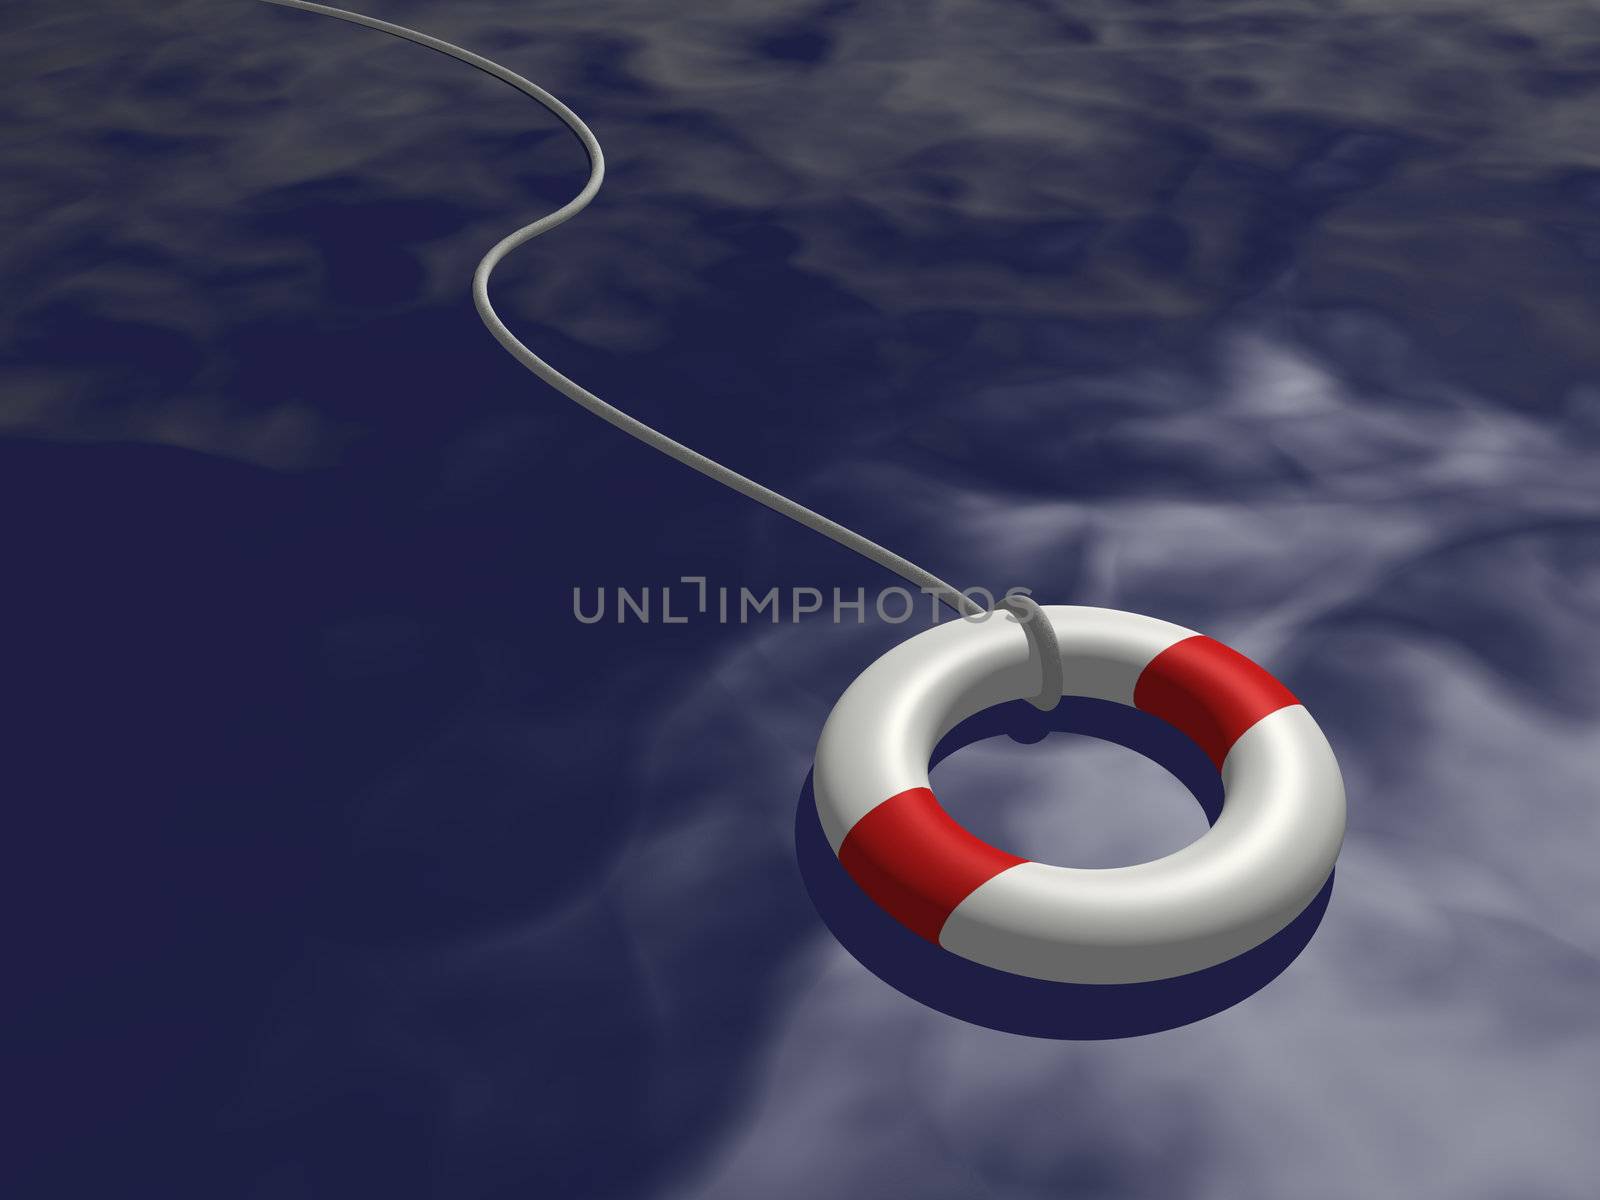 Image of a life preserver floating on blue water.